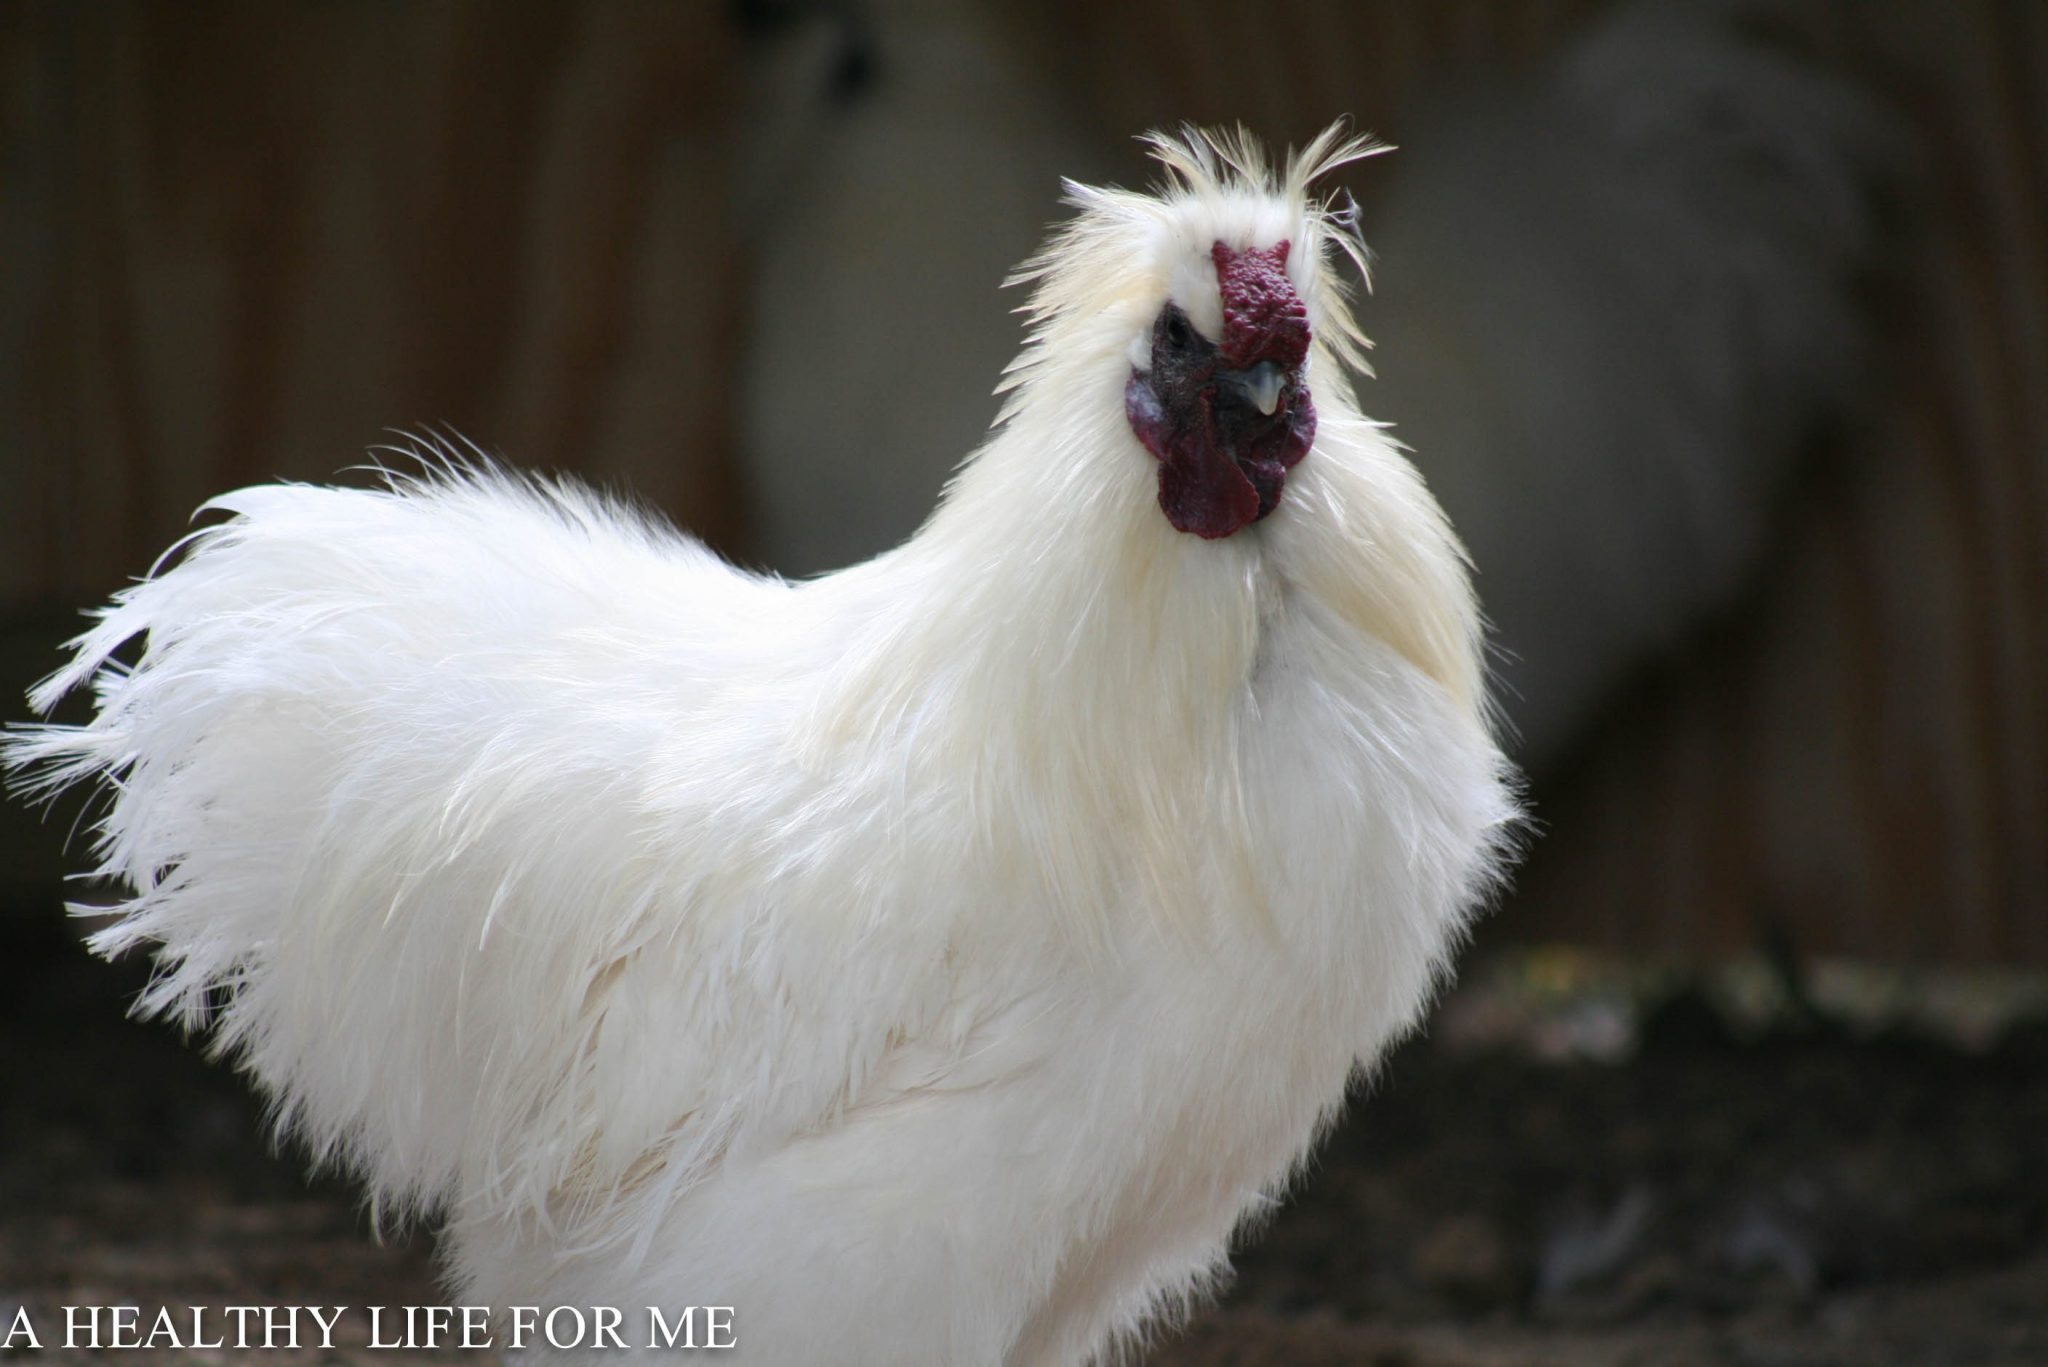 A fluffy white rooster